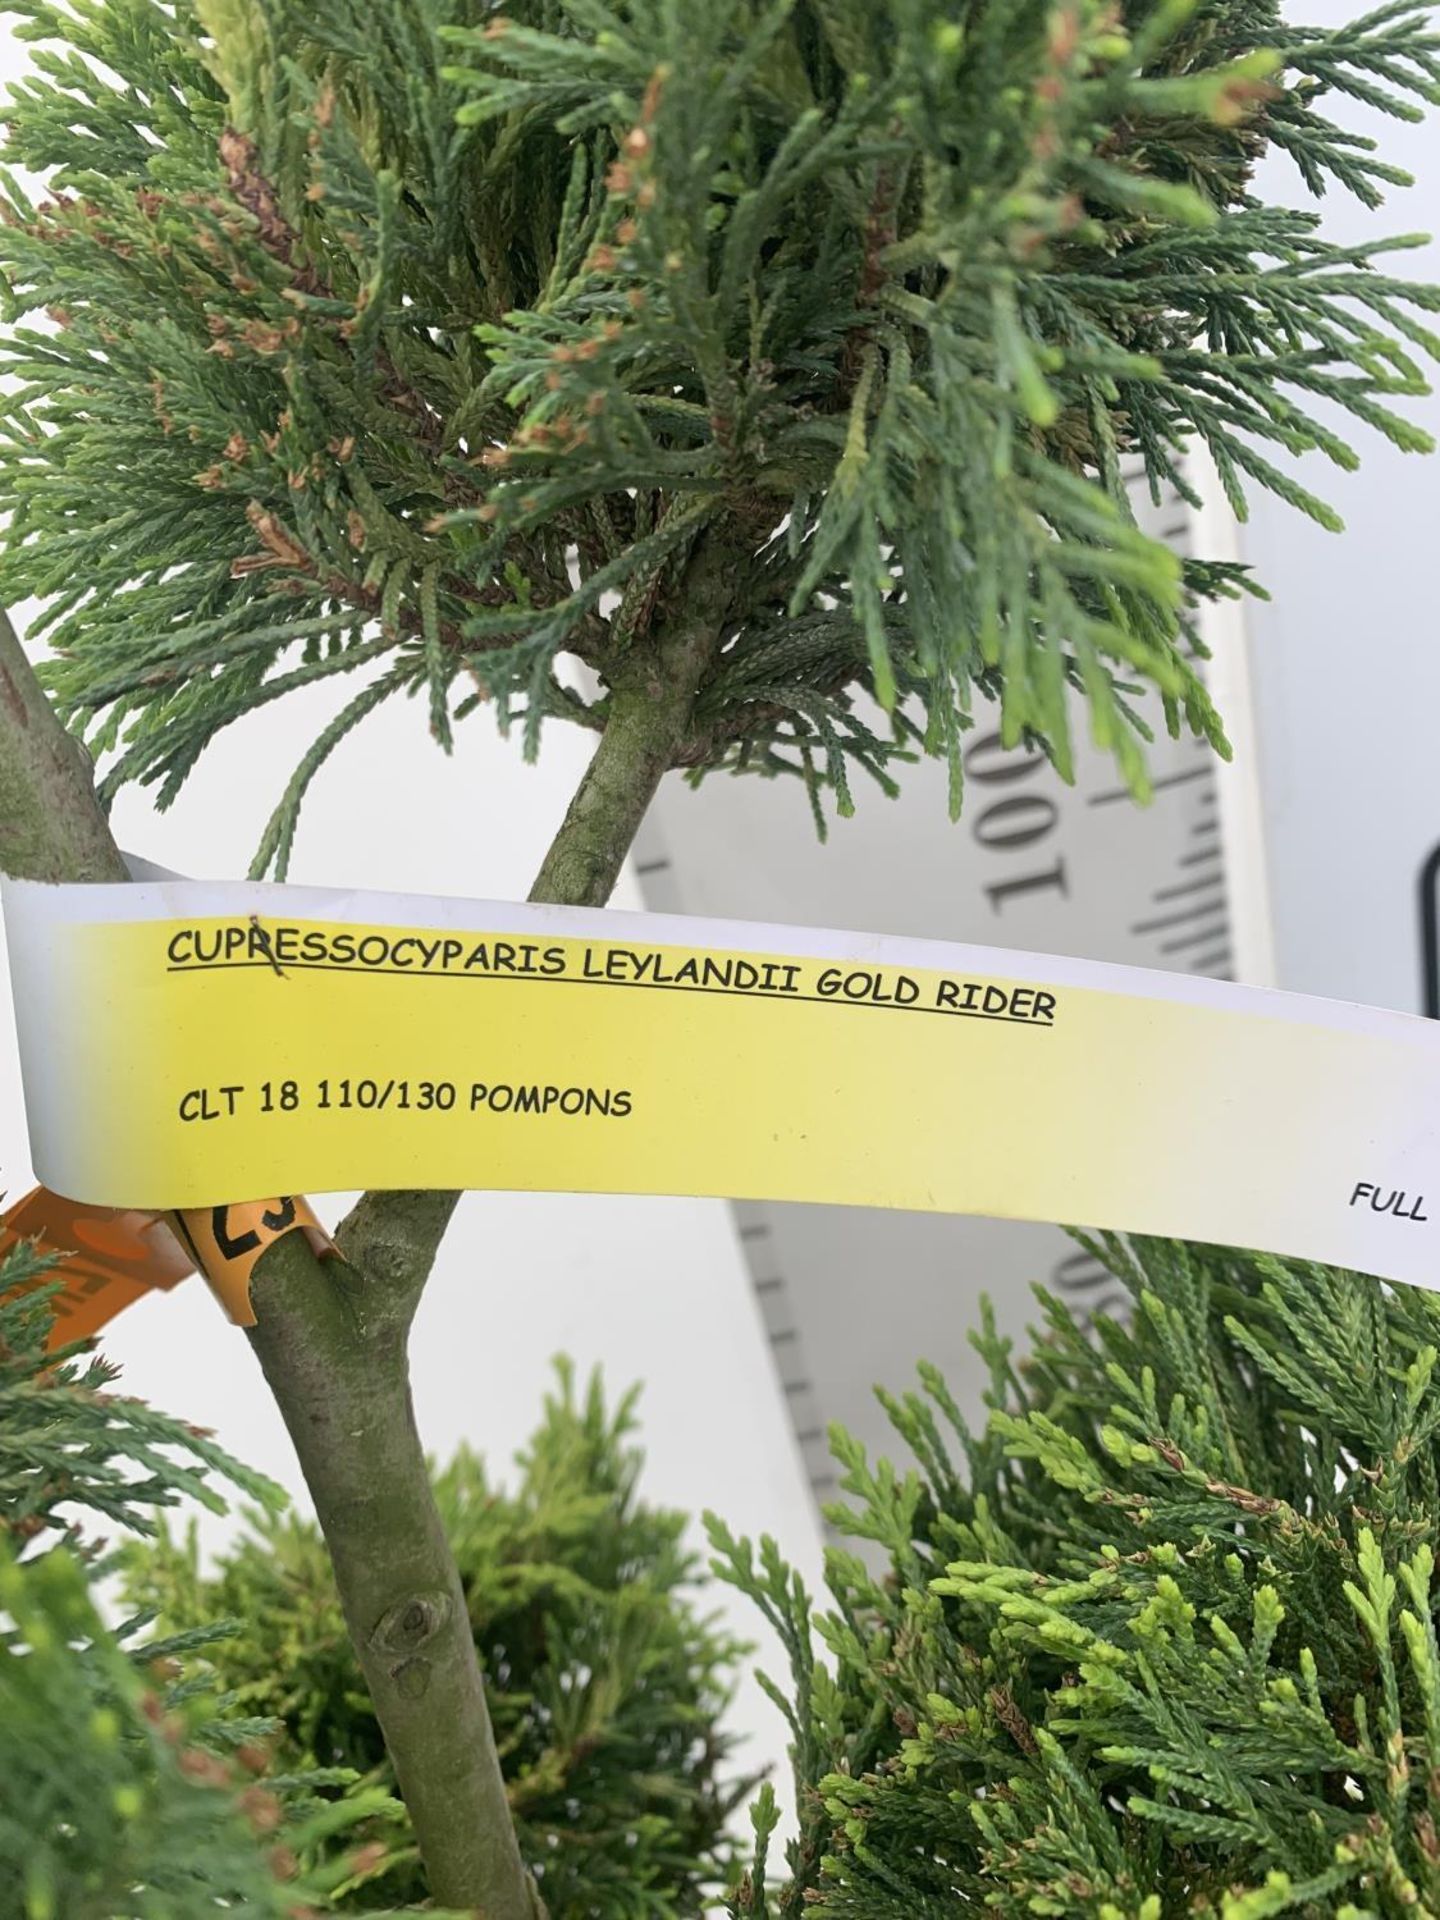 TWO POM POM TREES CUPRESSOCYPARIS LEYLANDII 'GOLD RIDER' APPROX 150CM IN HEIGHT IN 15 LTR POTS - Image 6 of 7